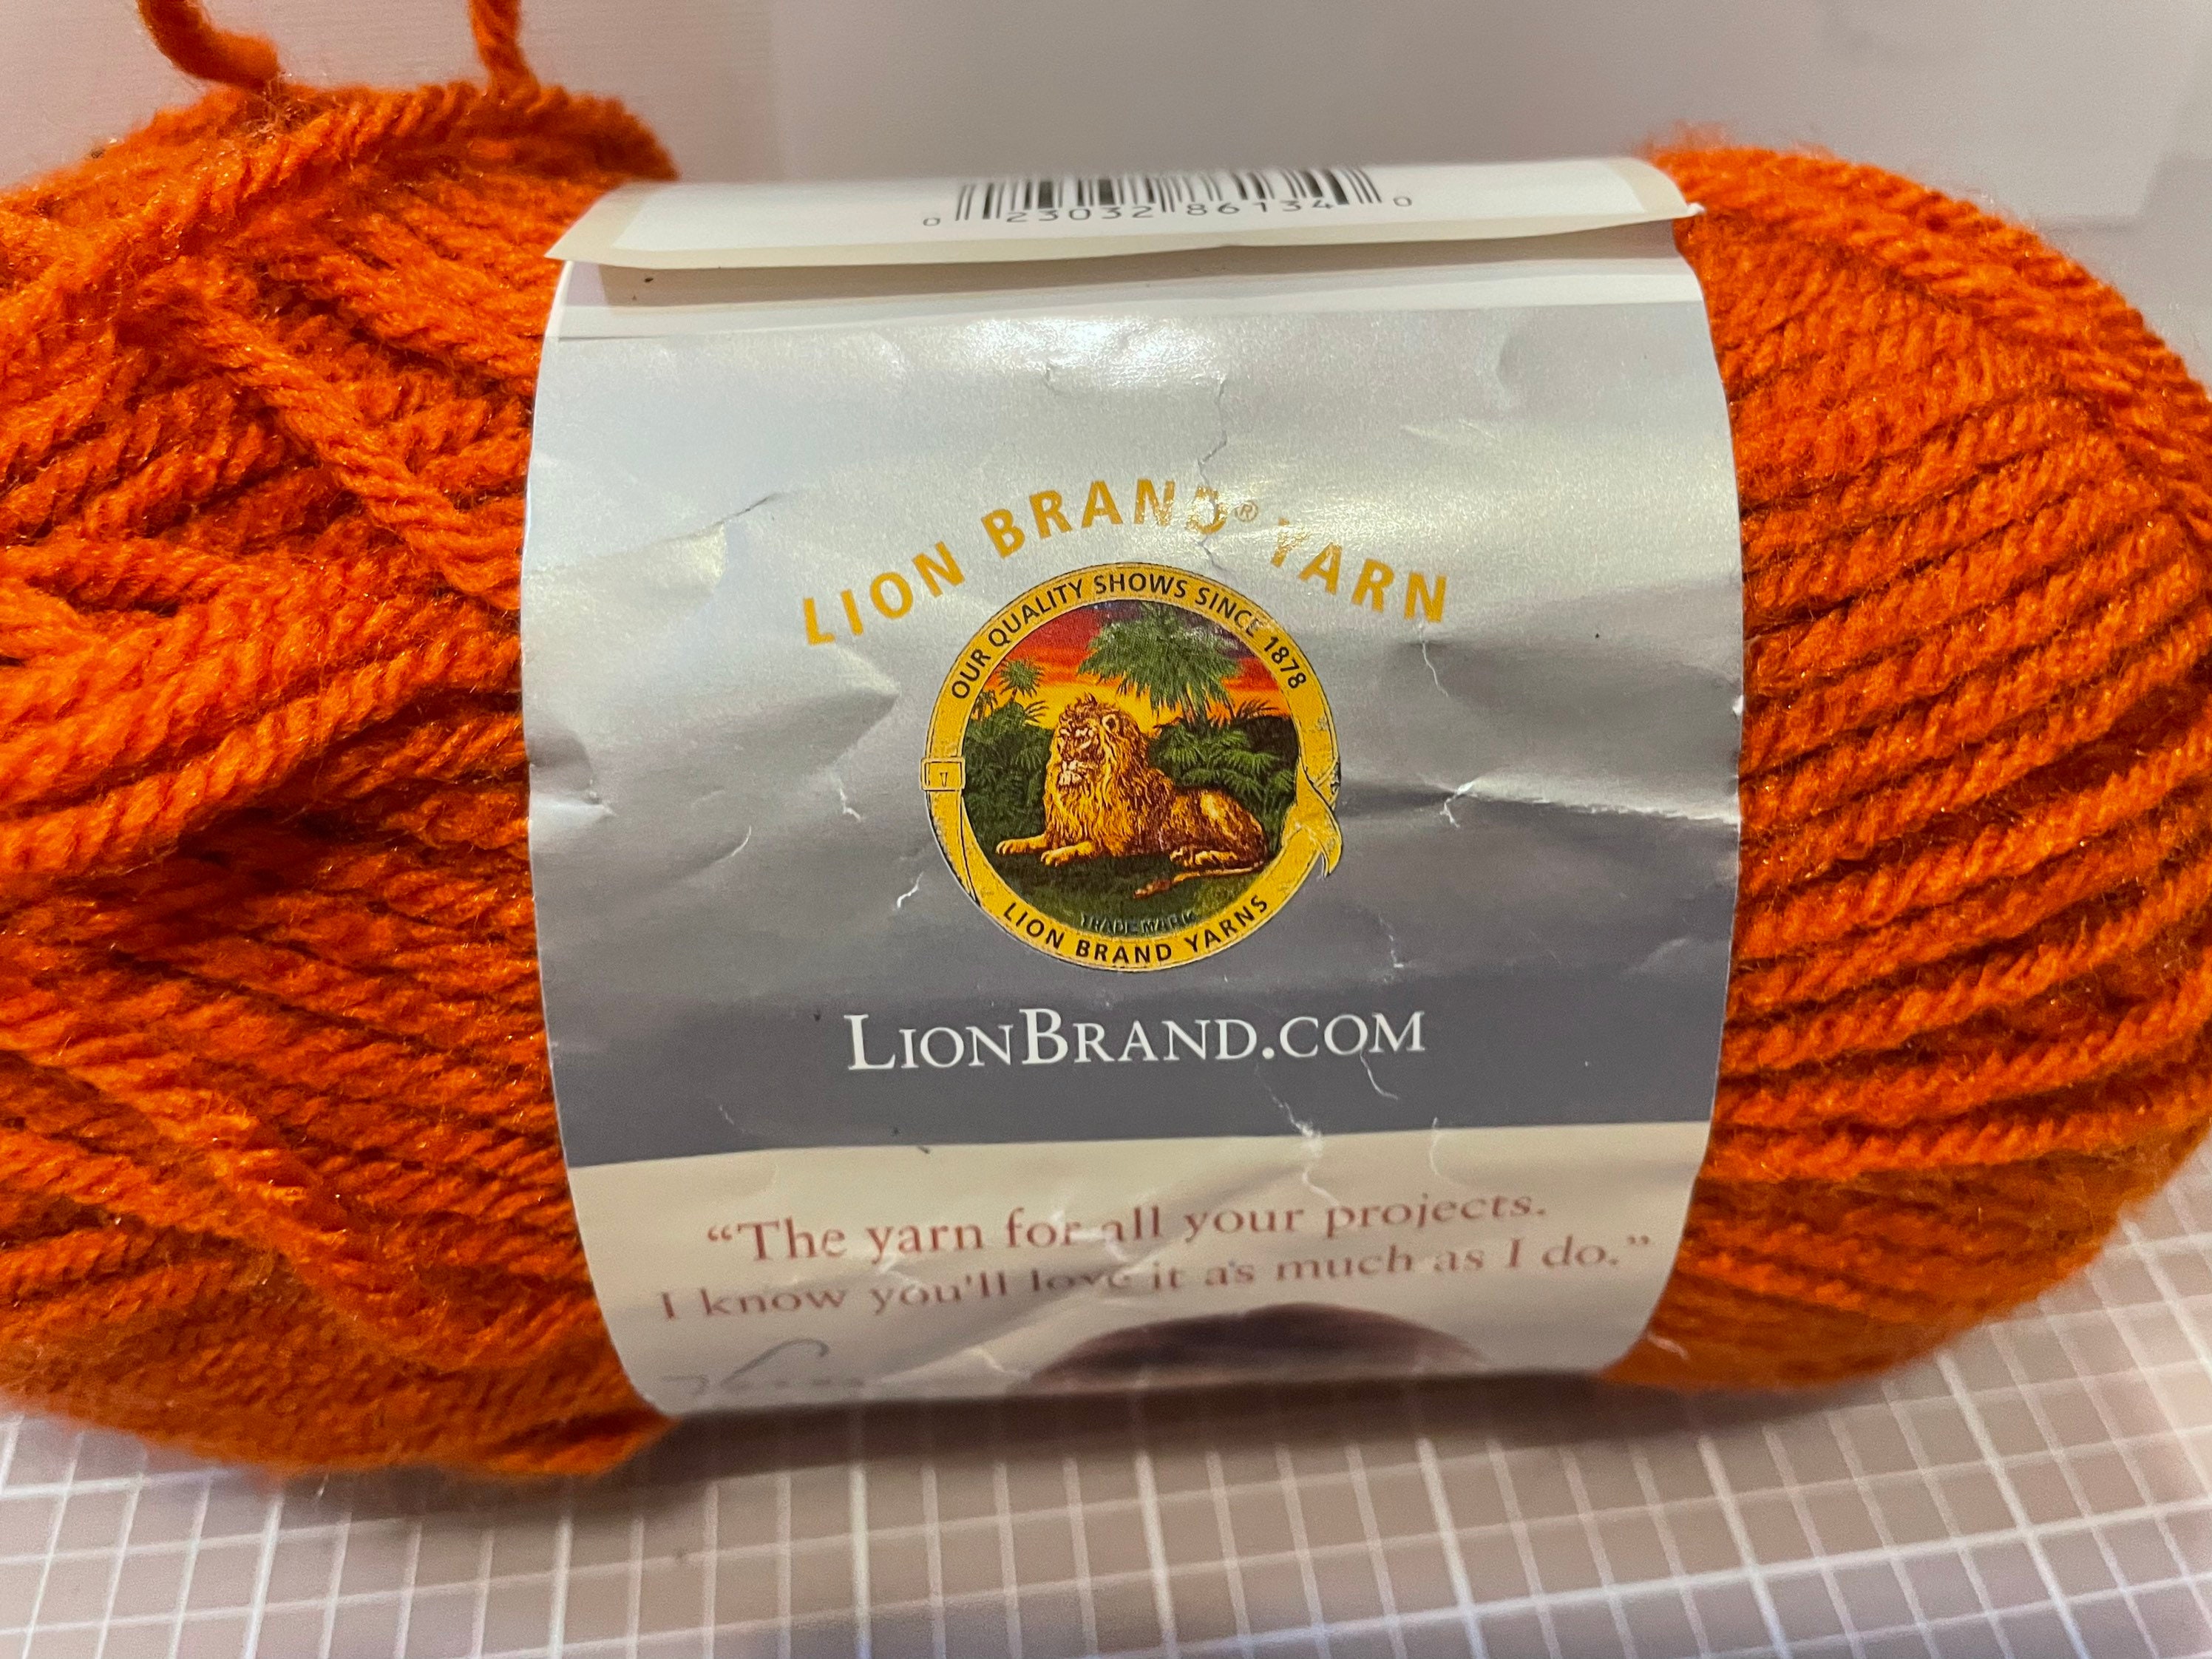 I Love This Yarn in Terra Cotta Color, Yarn in a Mix of Deep Burnt